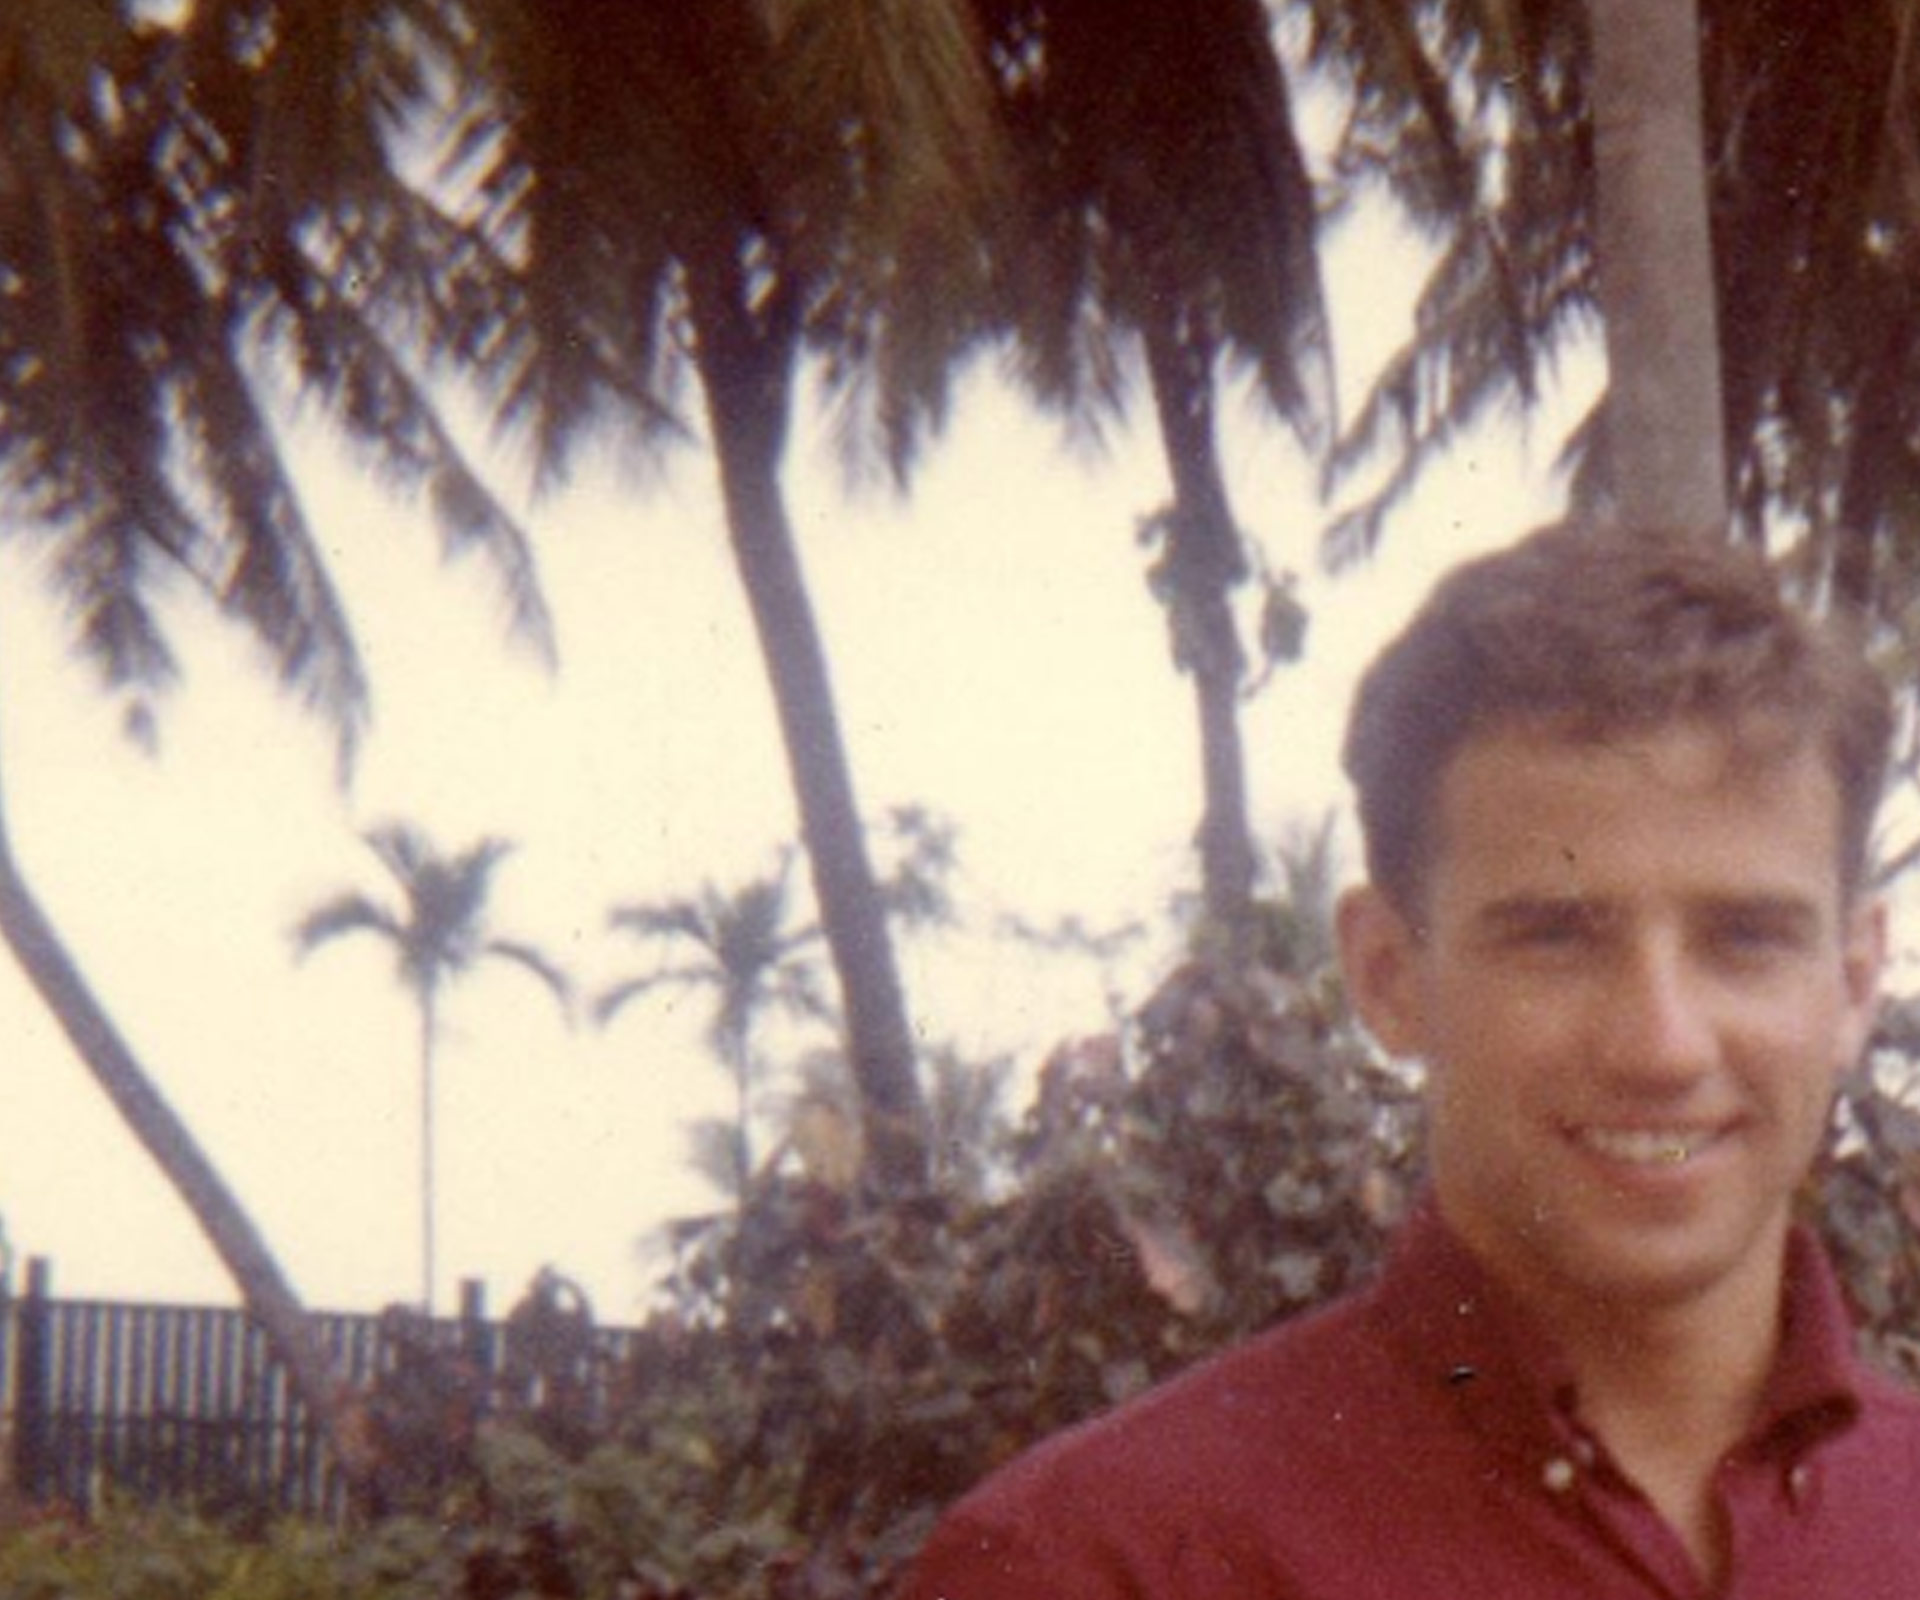 This picture of a young ‘hot’ Joe Biden is turning heads